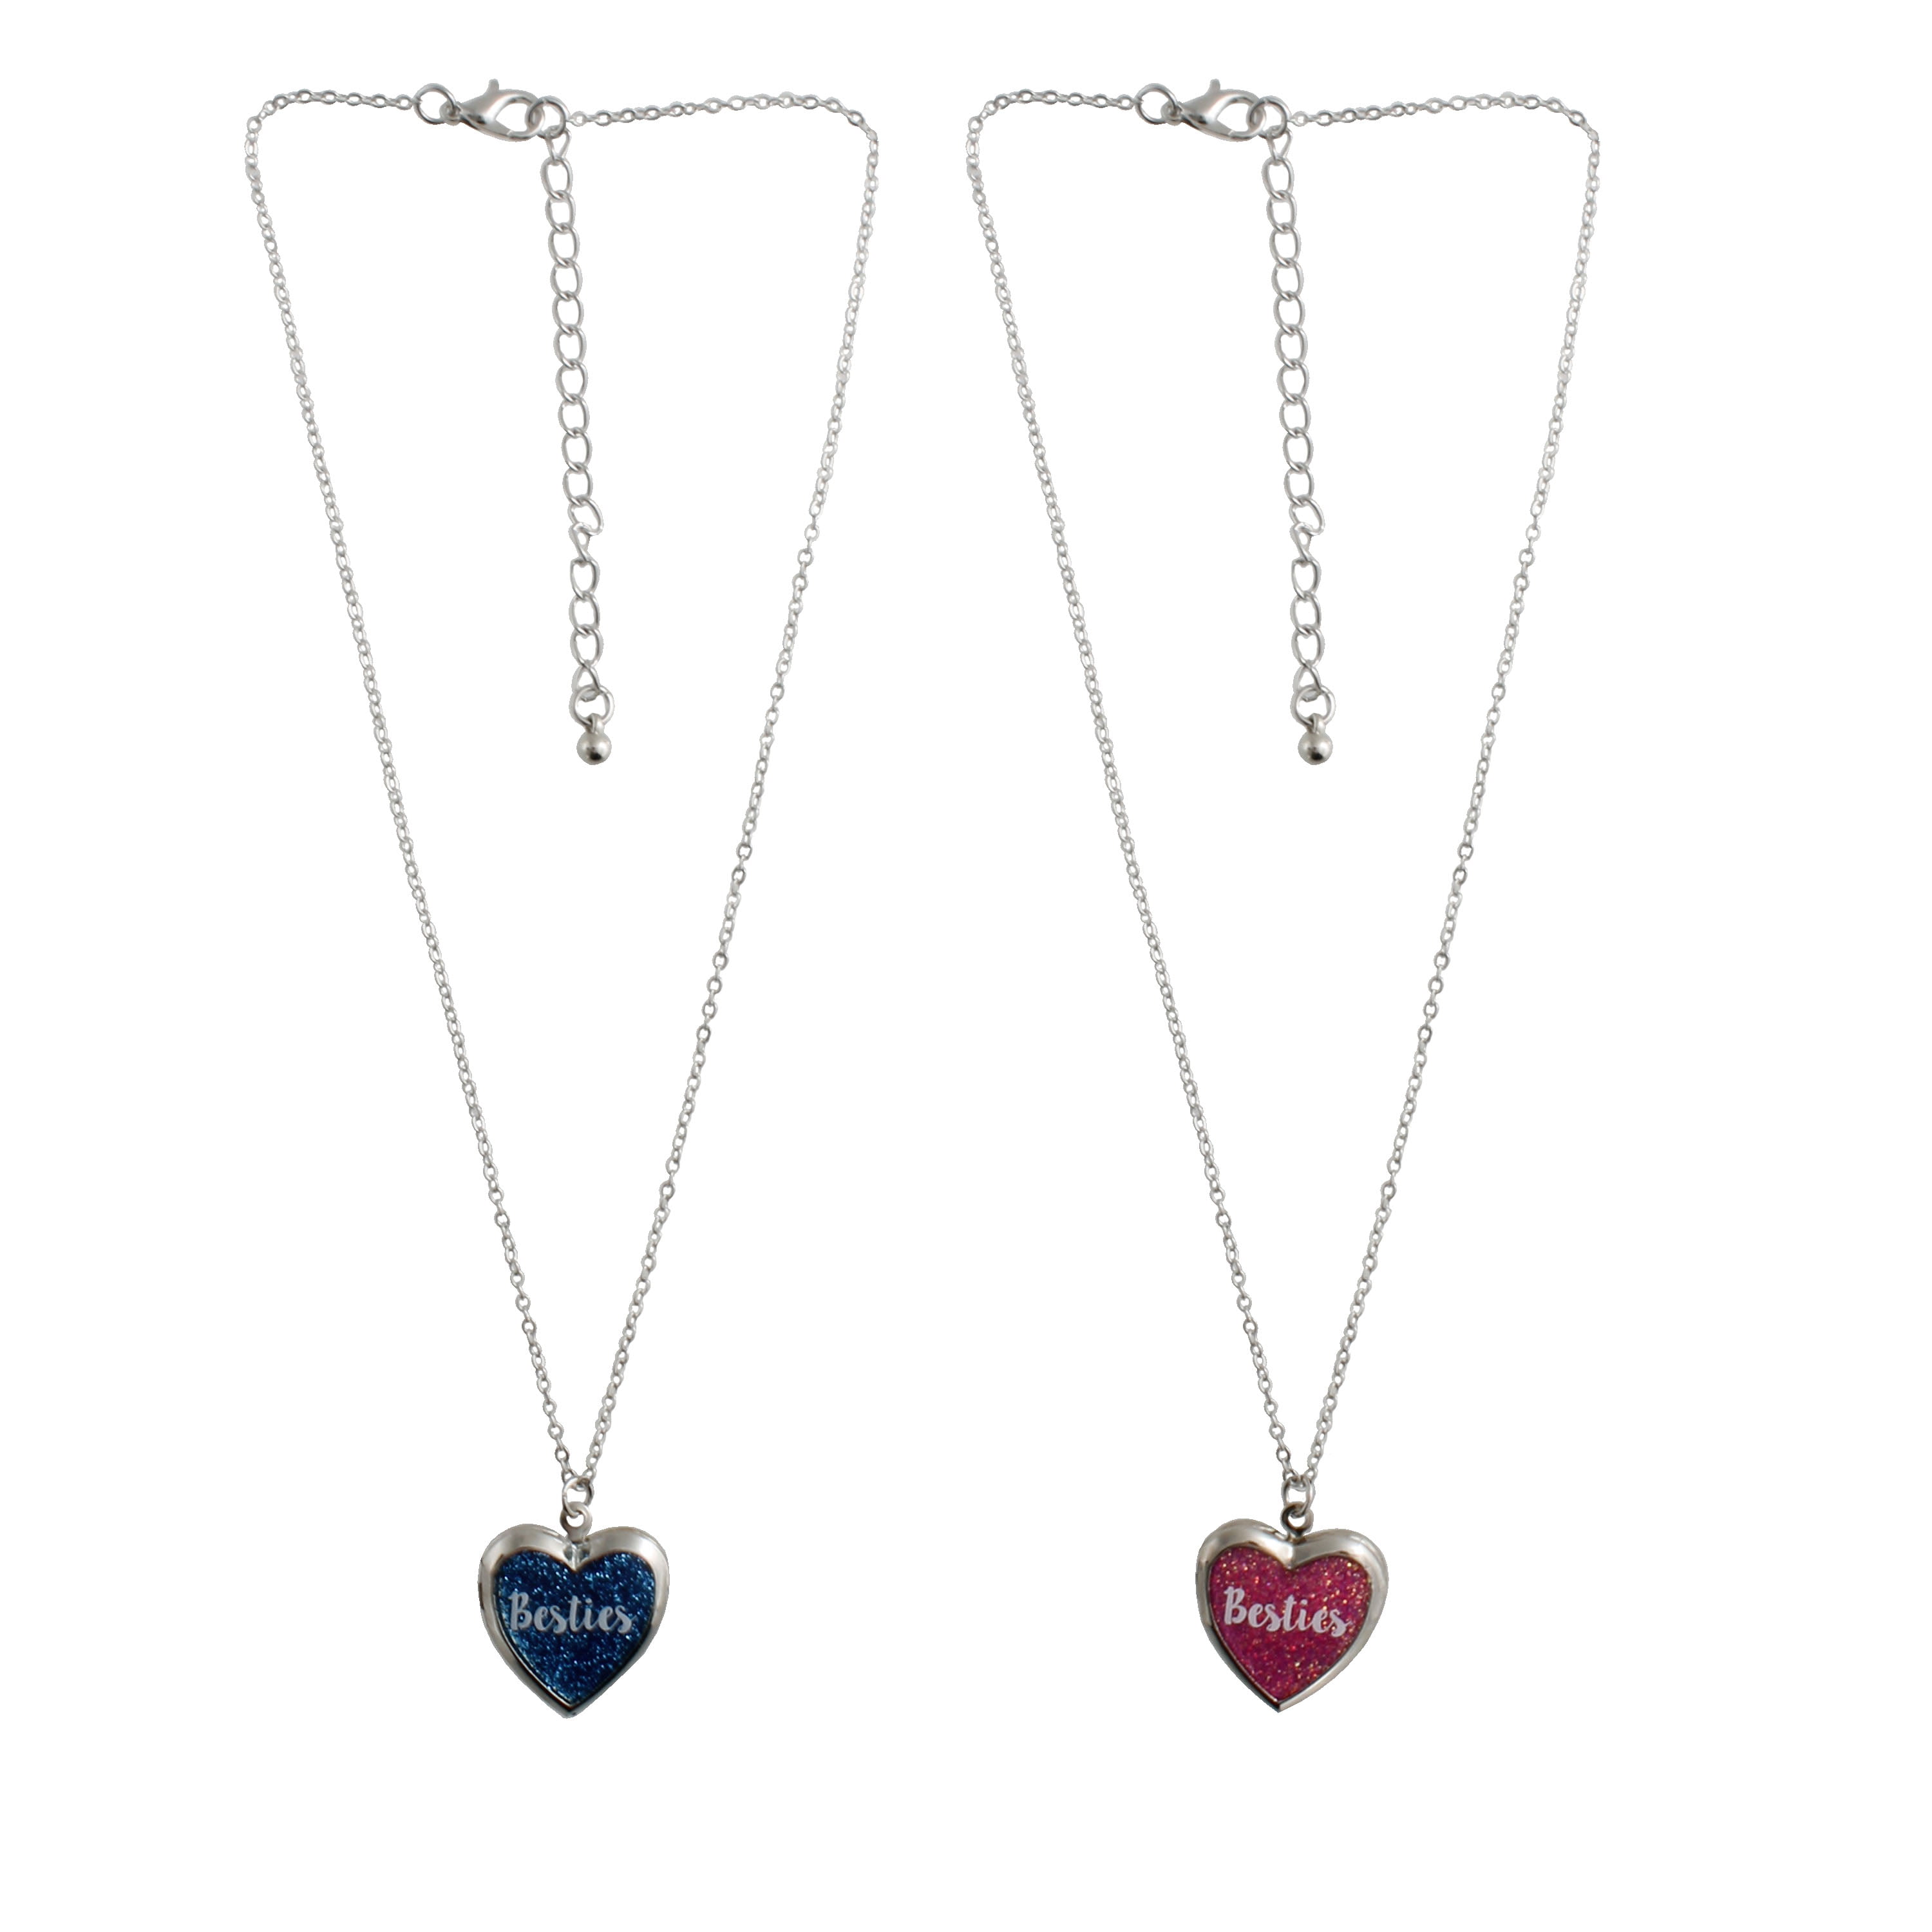 Girl's BFF Multicolored Enameled Magnetic Heart Friendship Necklaces -  DroneUp Delivery